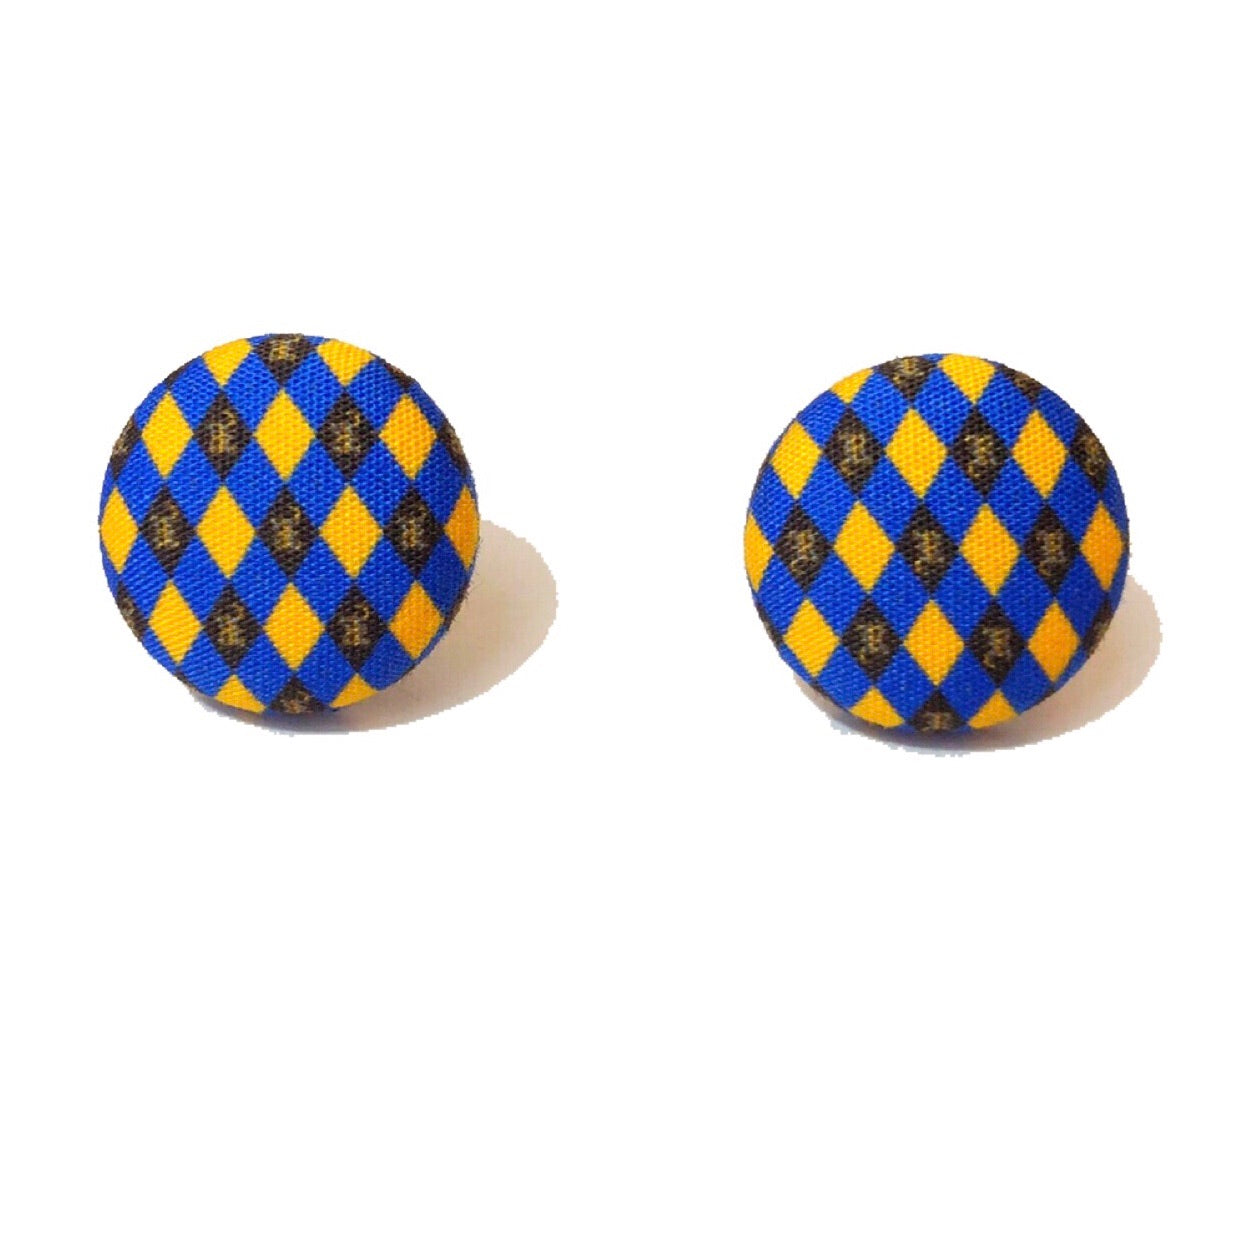 Blue & Gold Argyle Print Inspired Fabric Button Earring